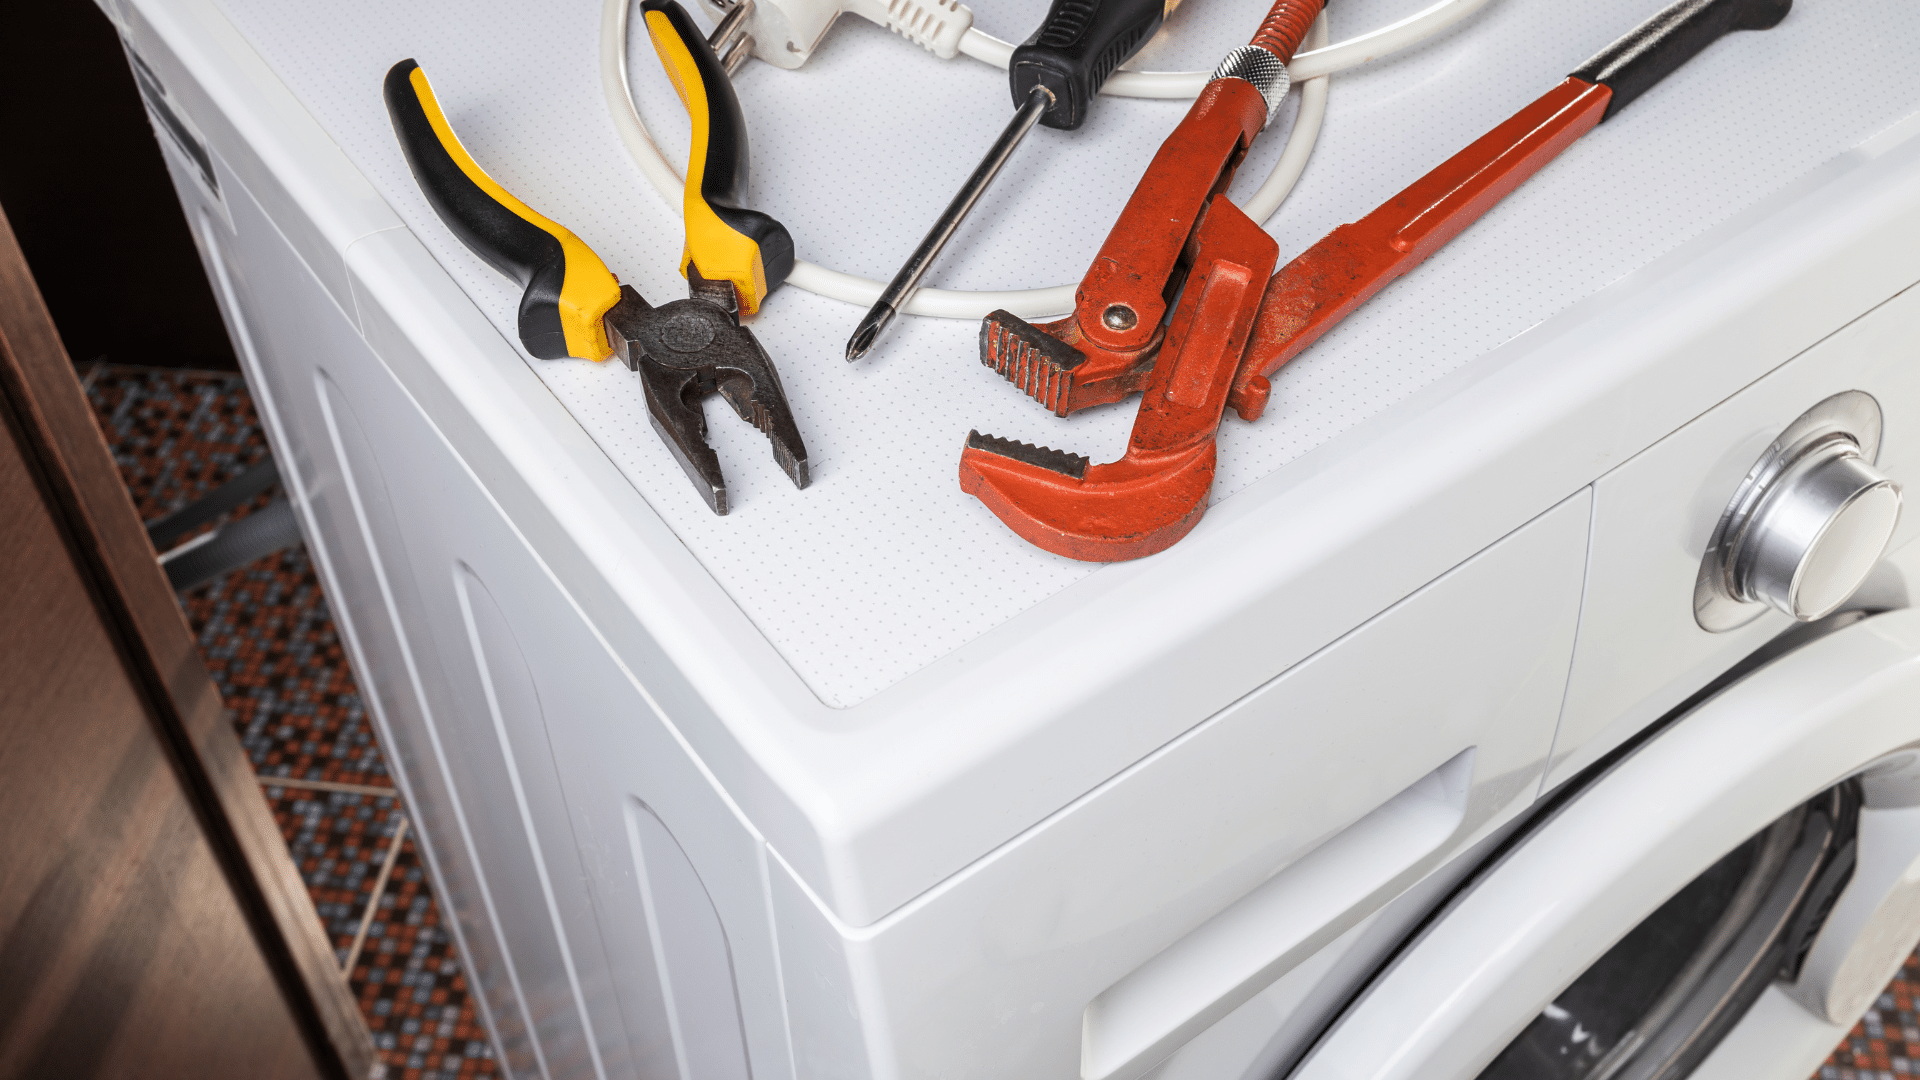 Featured image for “DIY vs. Professional Appliance Repair: When to Call a Technician”